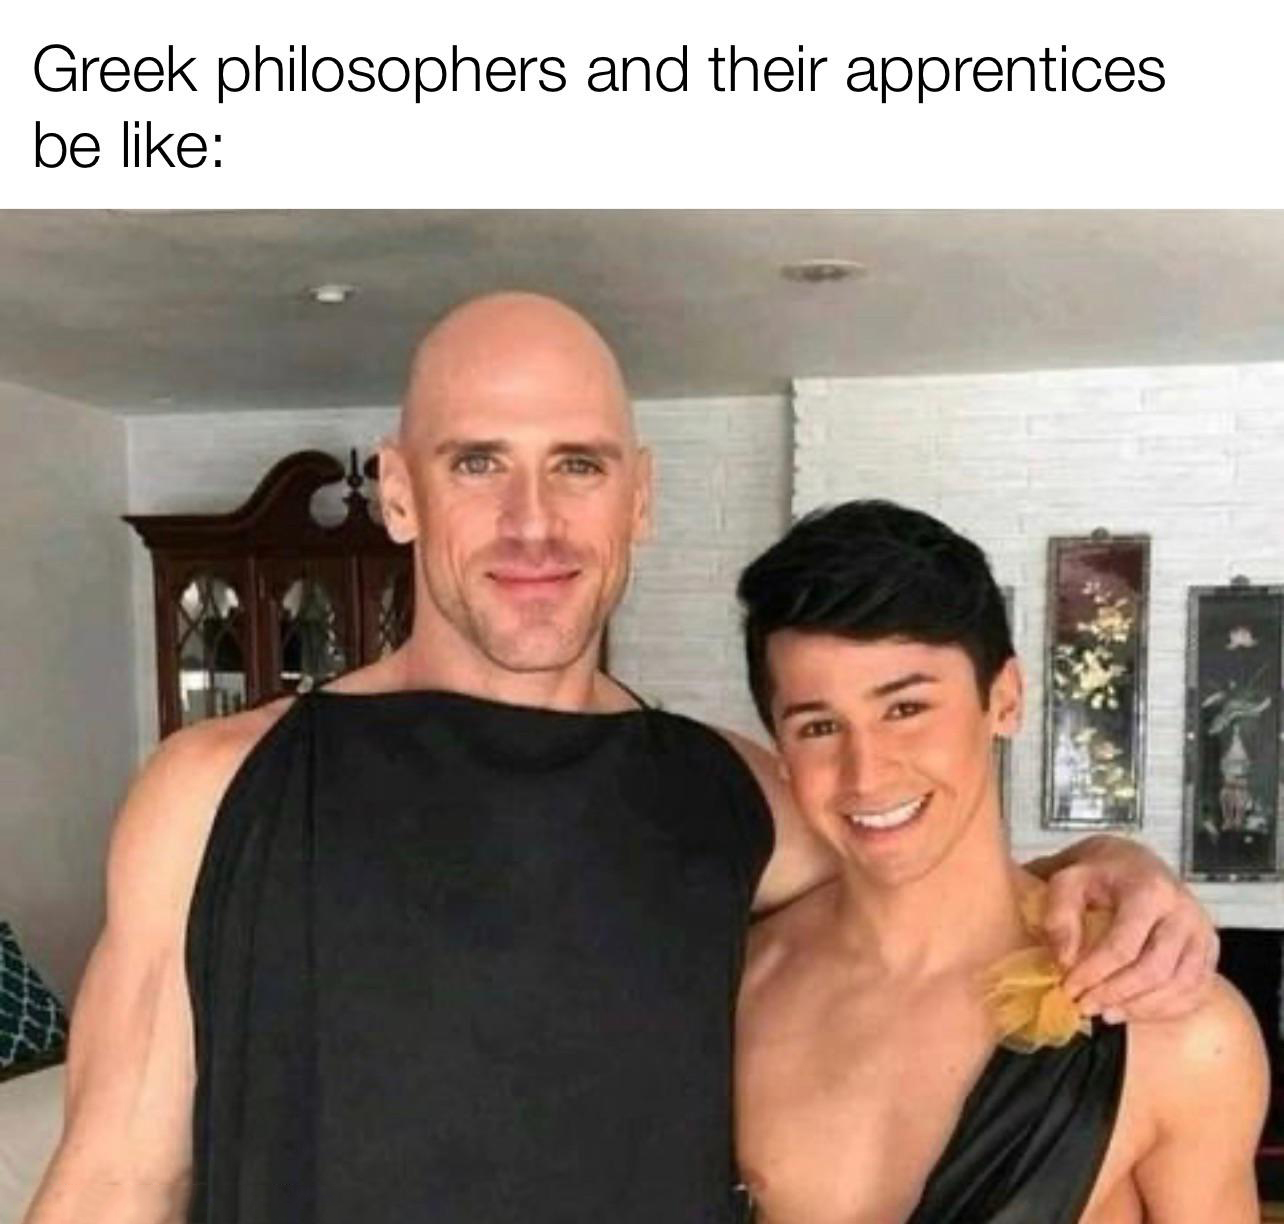 shoulder - Greek philosophers and their apprentices be